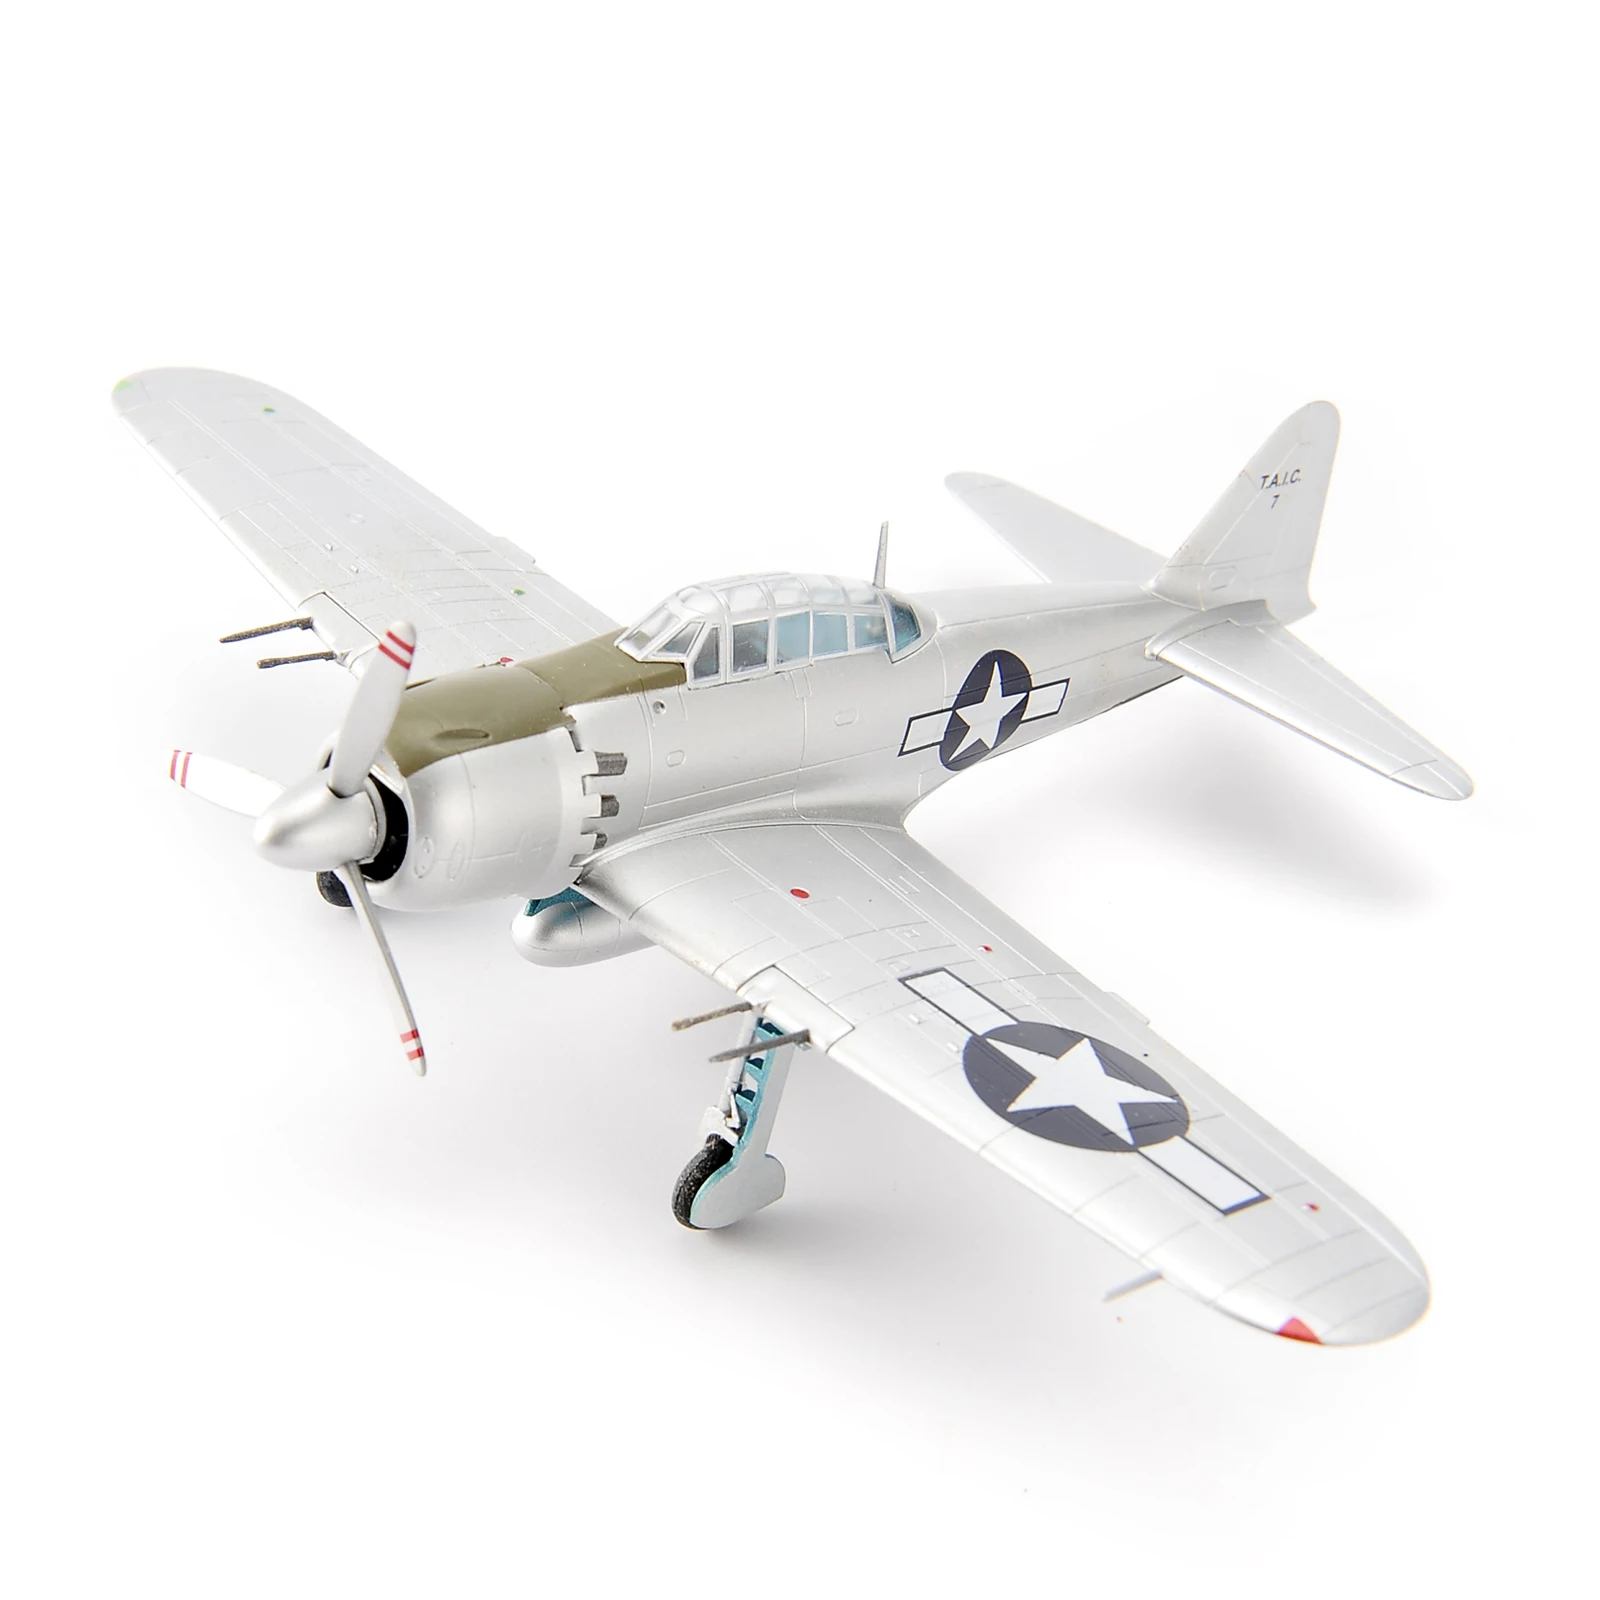 

1/72 AR-36354 American Experimental Plane Desktop Ornaments Kids Toys For Collection